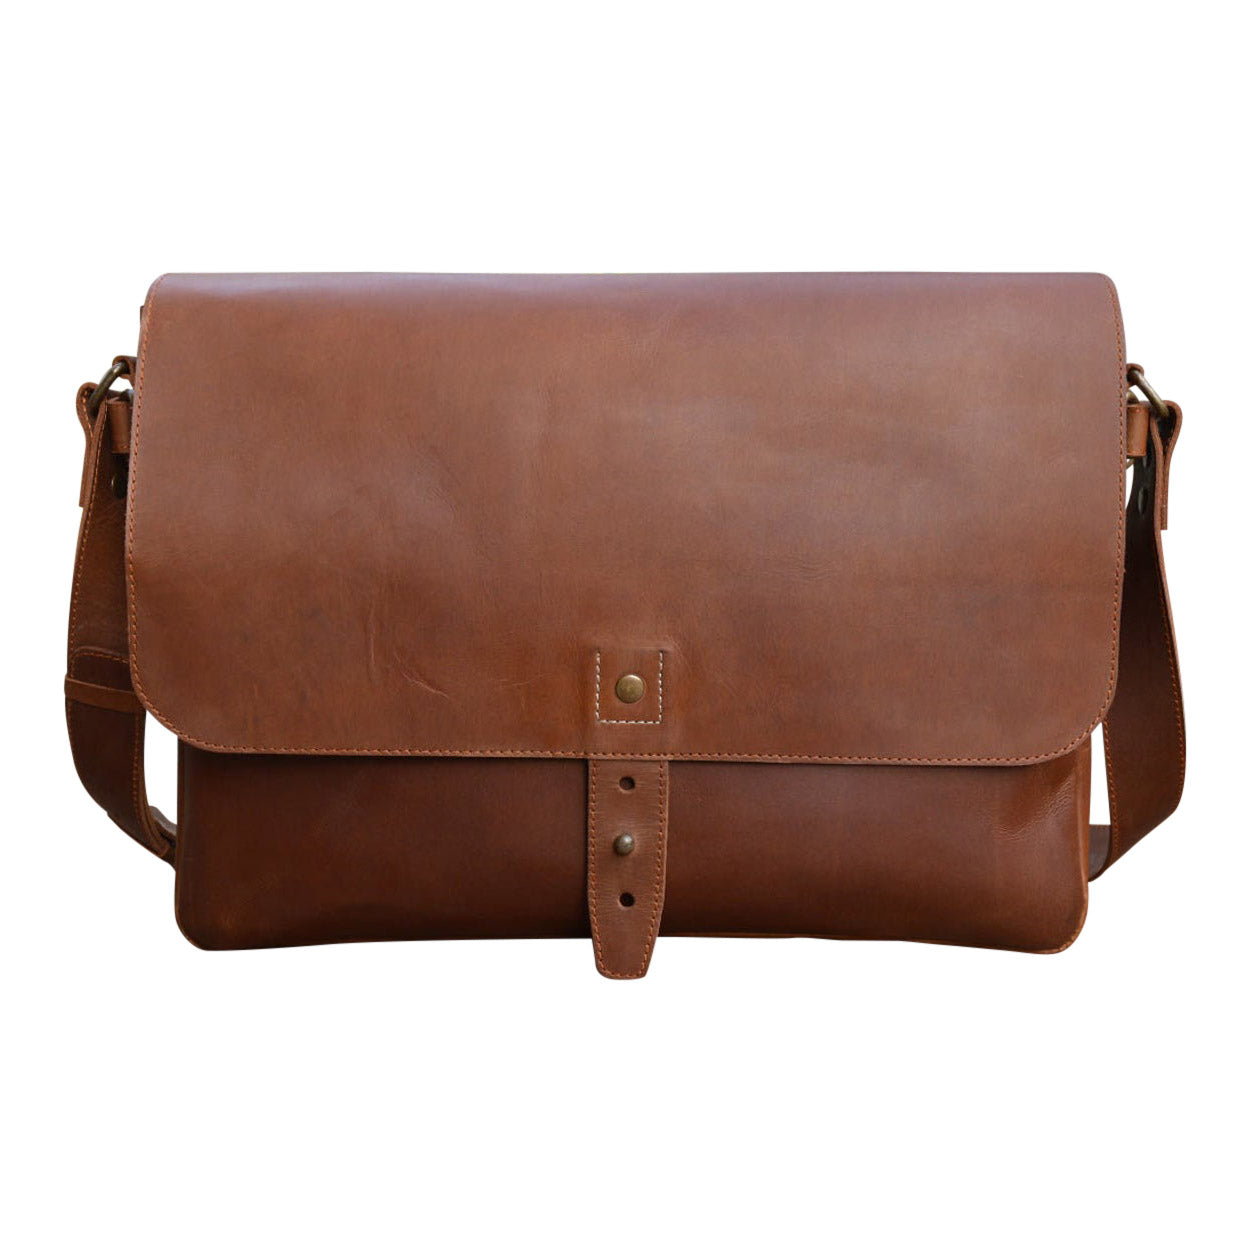 Classic leather messenger bag